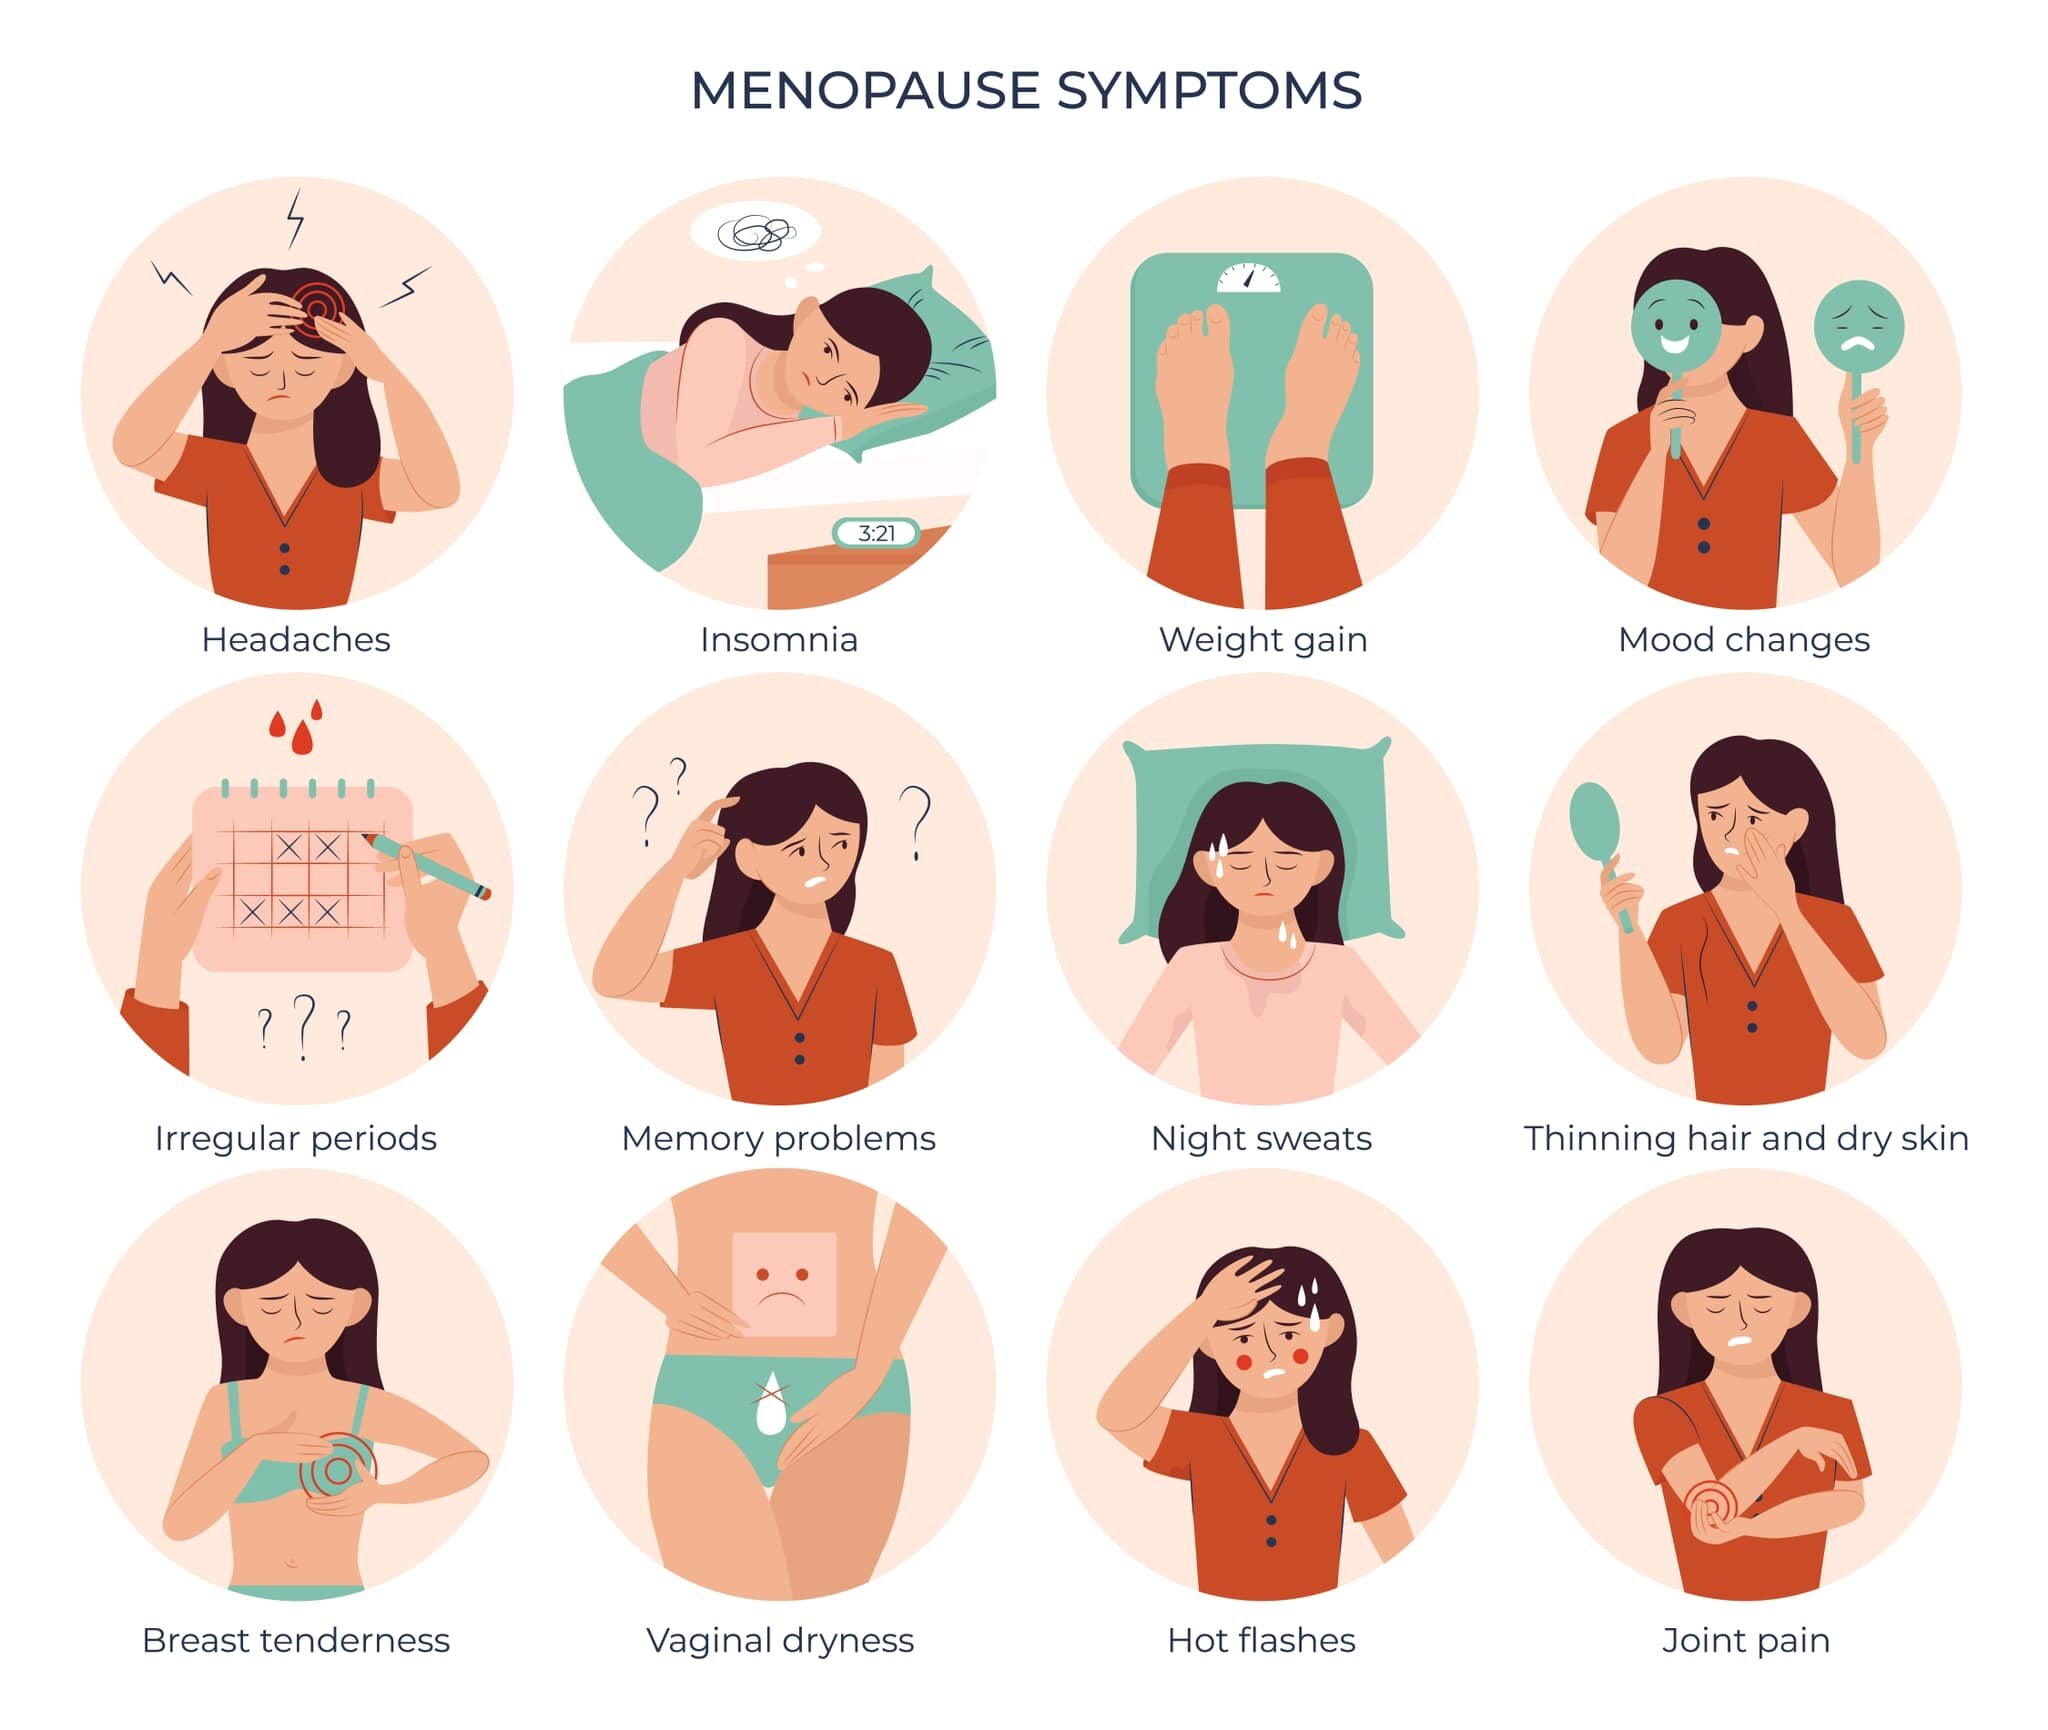 Do you know what menopause or andropause is? Are you suffering from hormonal changes, men? Are any women perimenopausal, menopausal, postmenopausal or just feel half crazy??!! Welcome to the next 80% of your life, UGH!! Yes, women and men will be in 